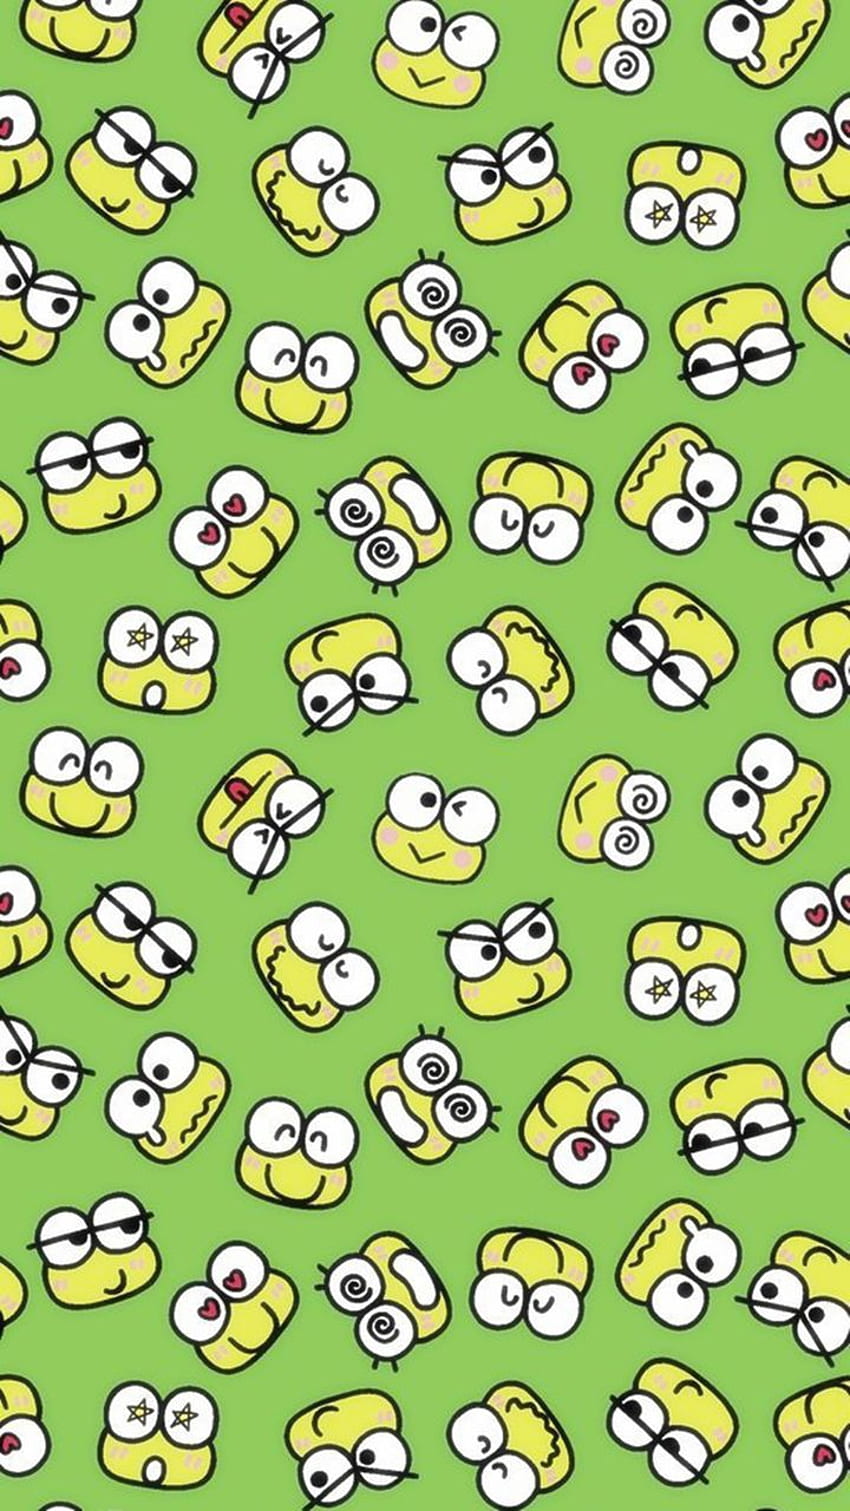 Check out awheelwright3918s Shuffles Keroppi  keroppi keroppiaesthetic  keroppiwallpaper greenaesthetic green greenvibes flowers hearts